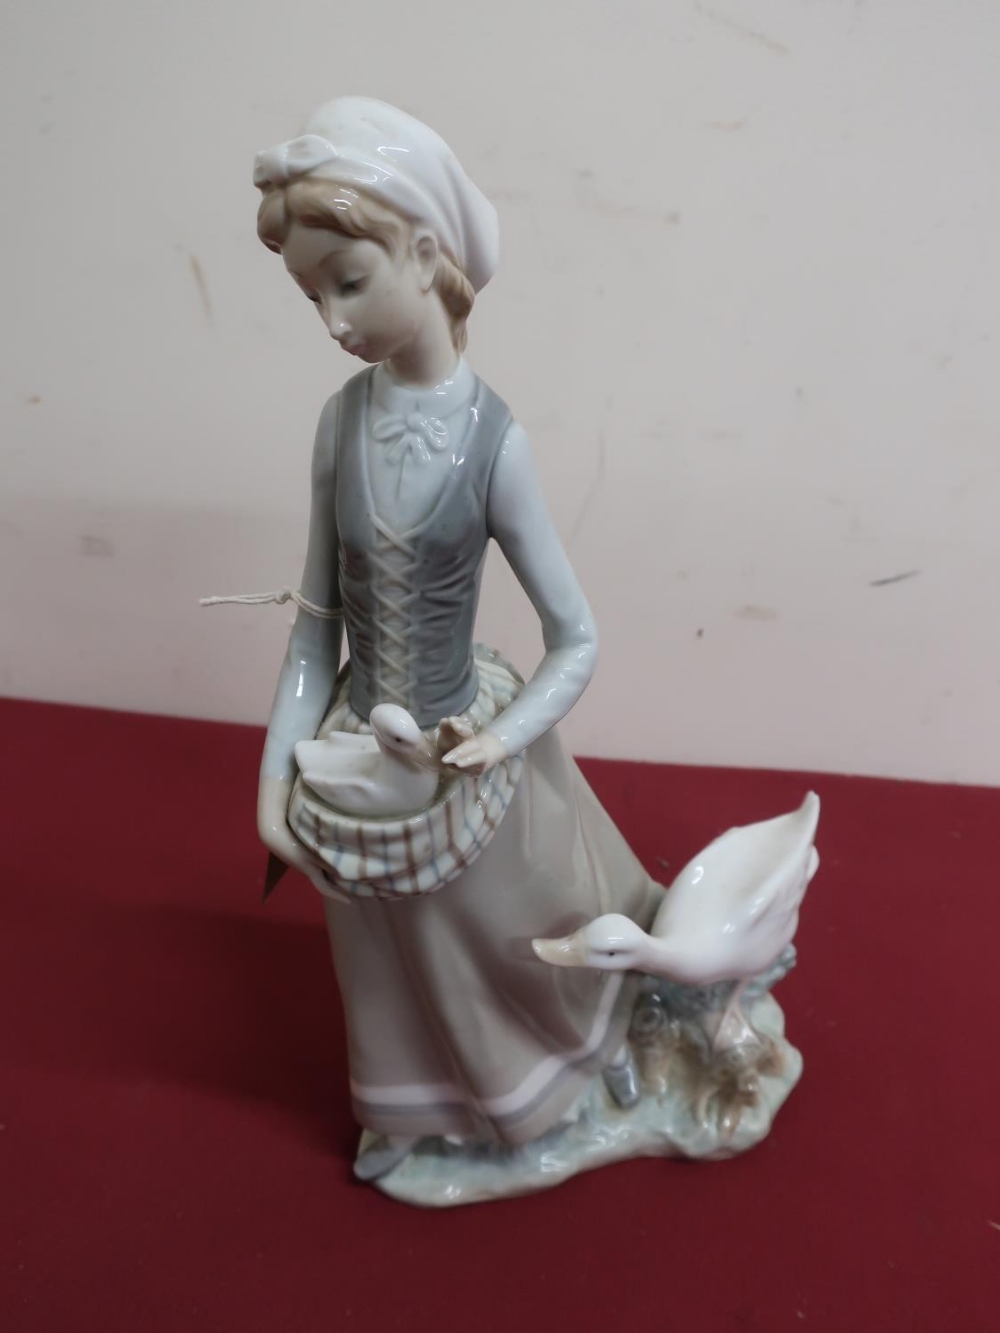 Lladro porcelain figure of a girl with duck and duckling